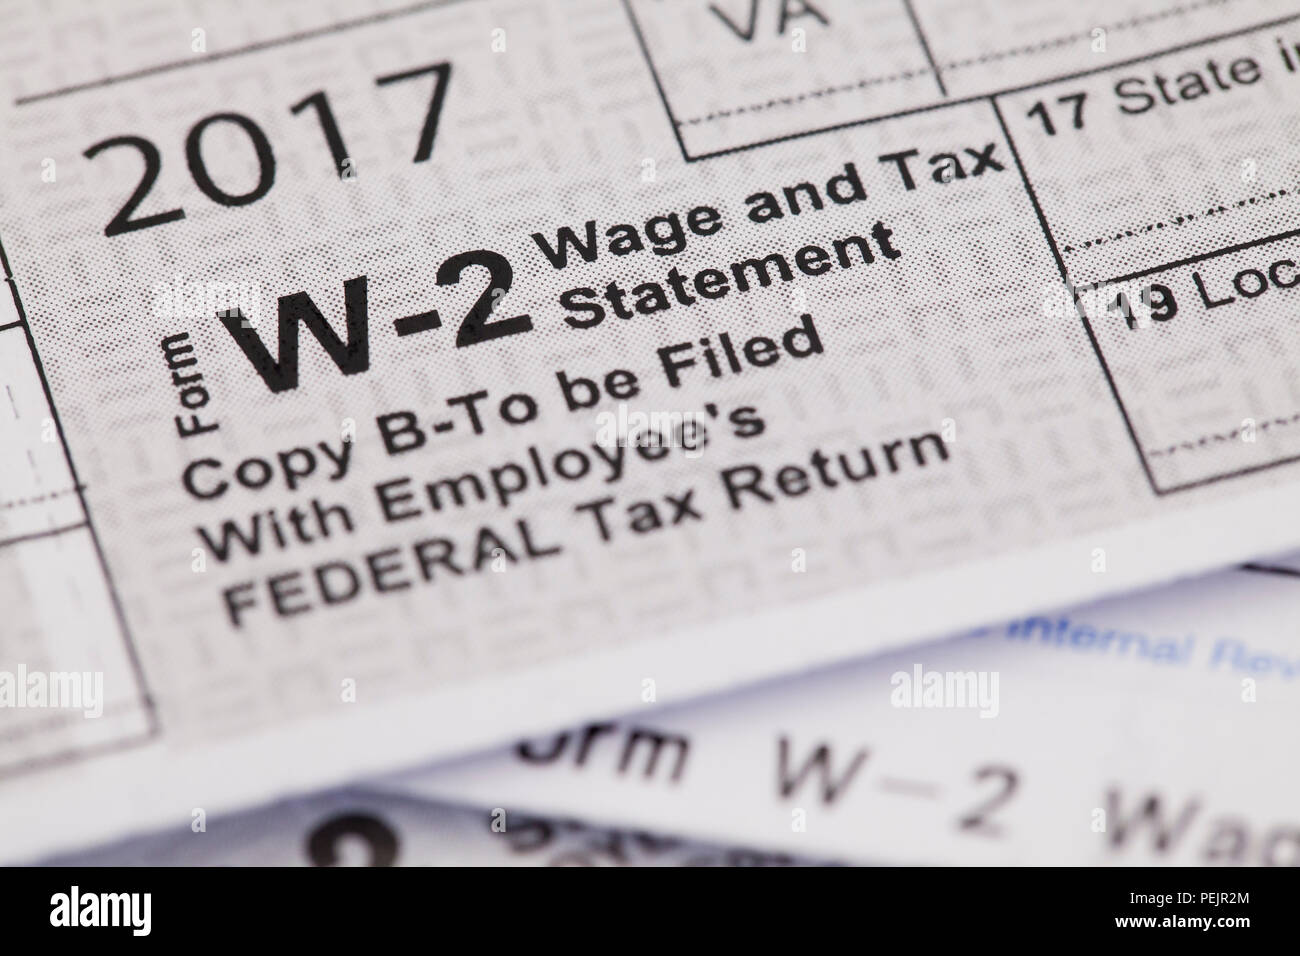 2017 W-2, Federal Wage and Tax, statement - USA Stock Photo